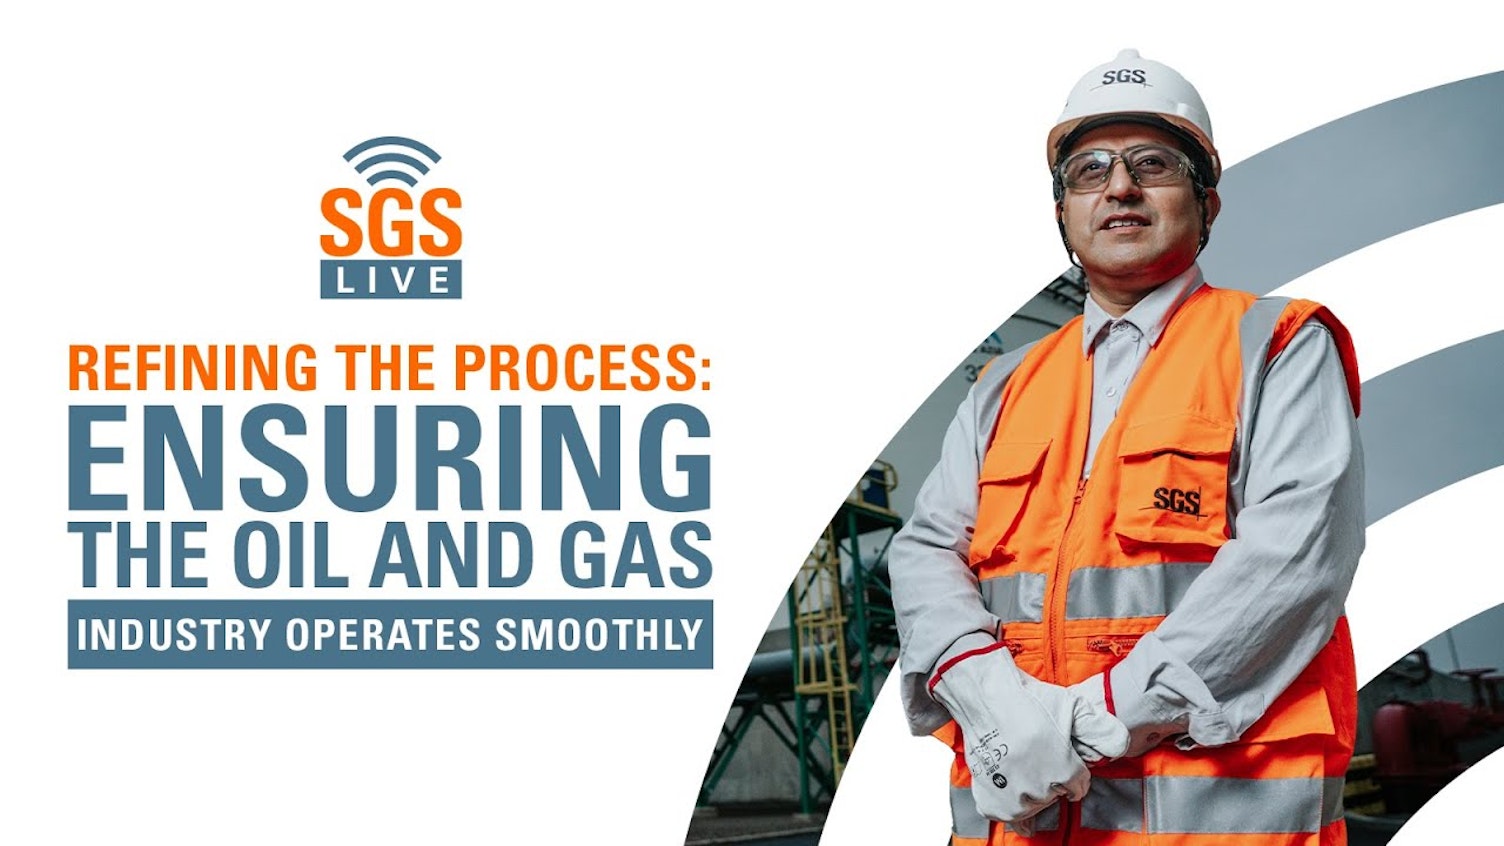 SGS Live Presents: Ensuring the Oil and Gas Industry Operates Smoothly